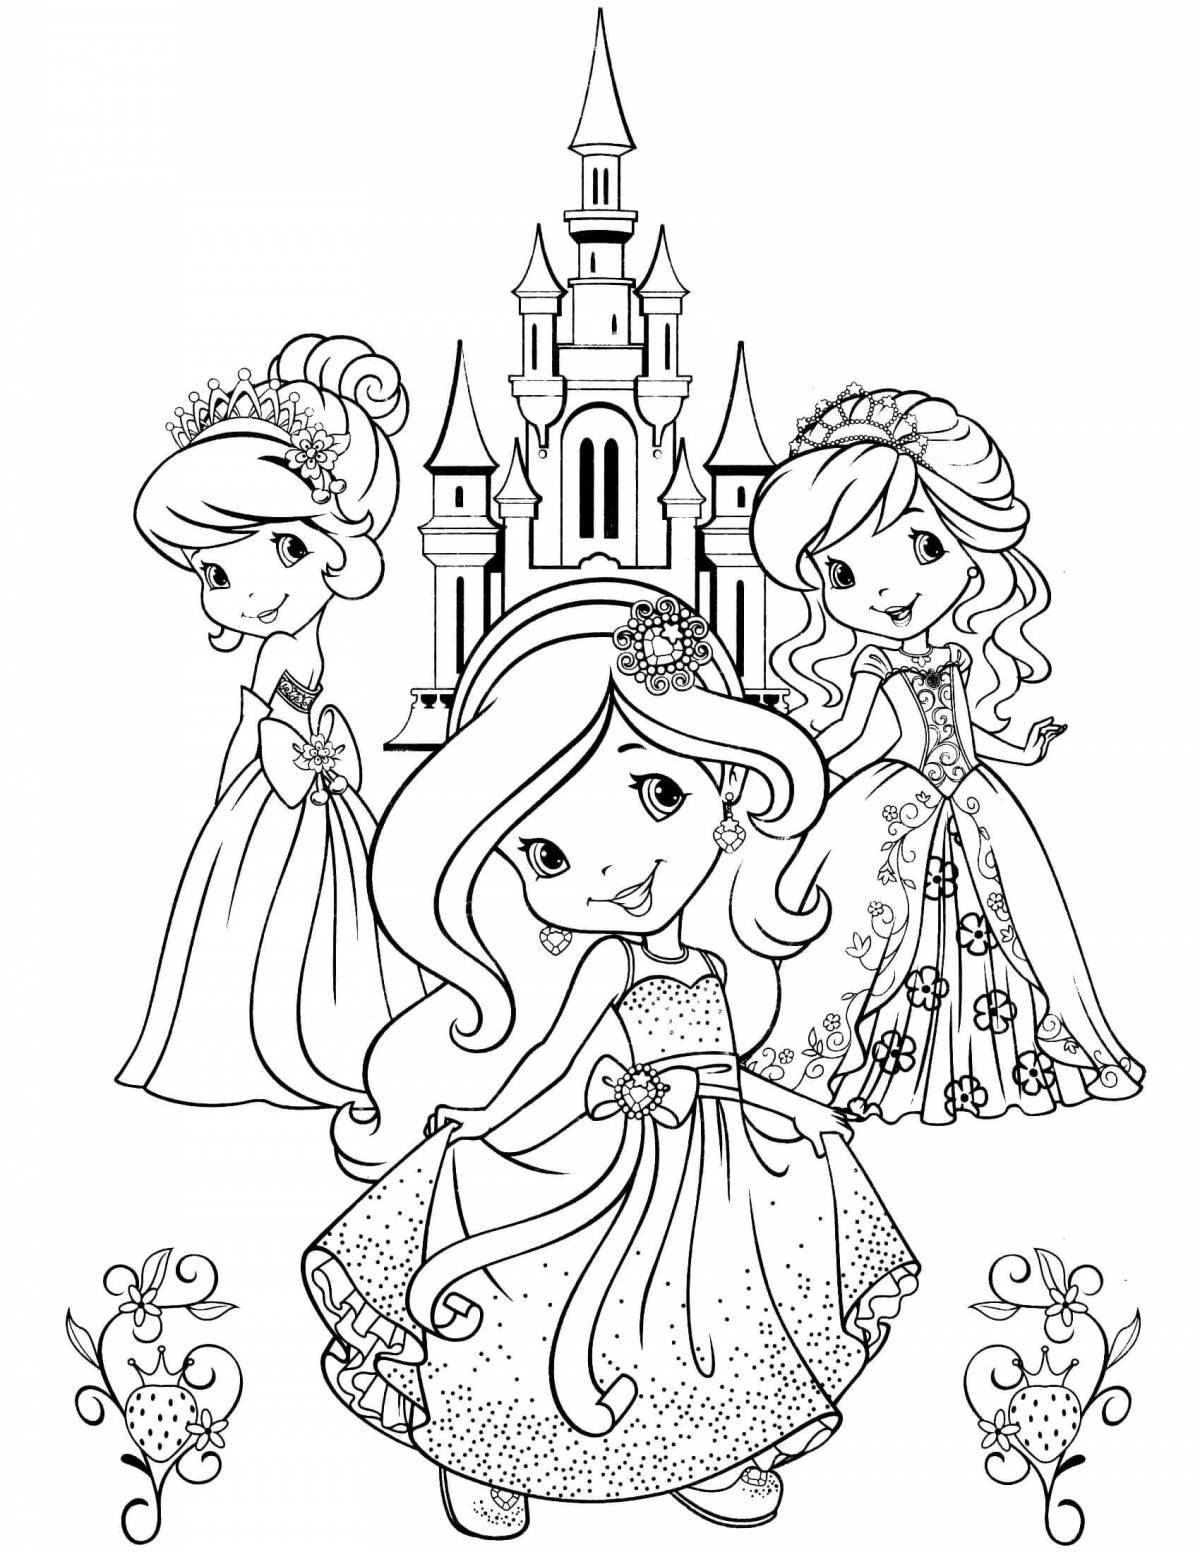 Great princess coloring book for kids